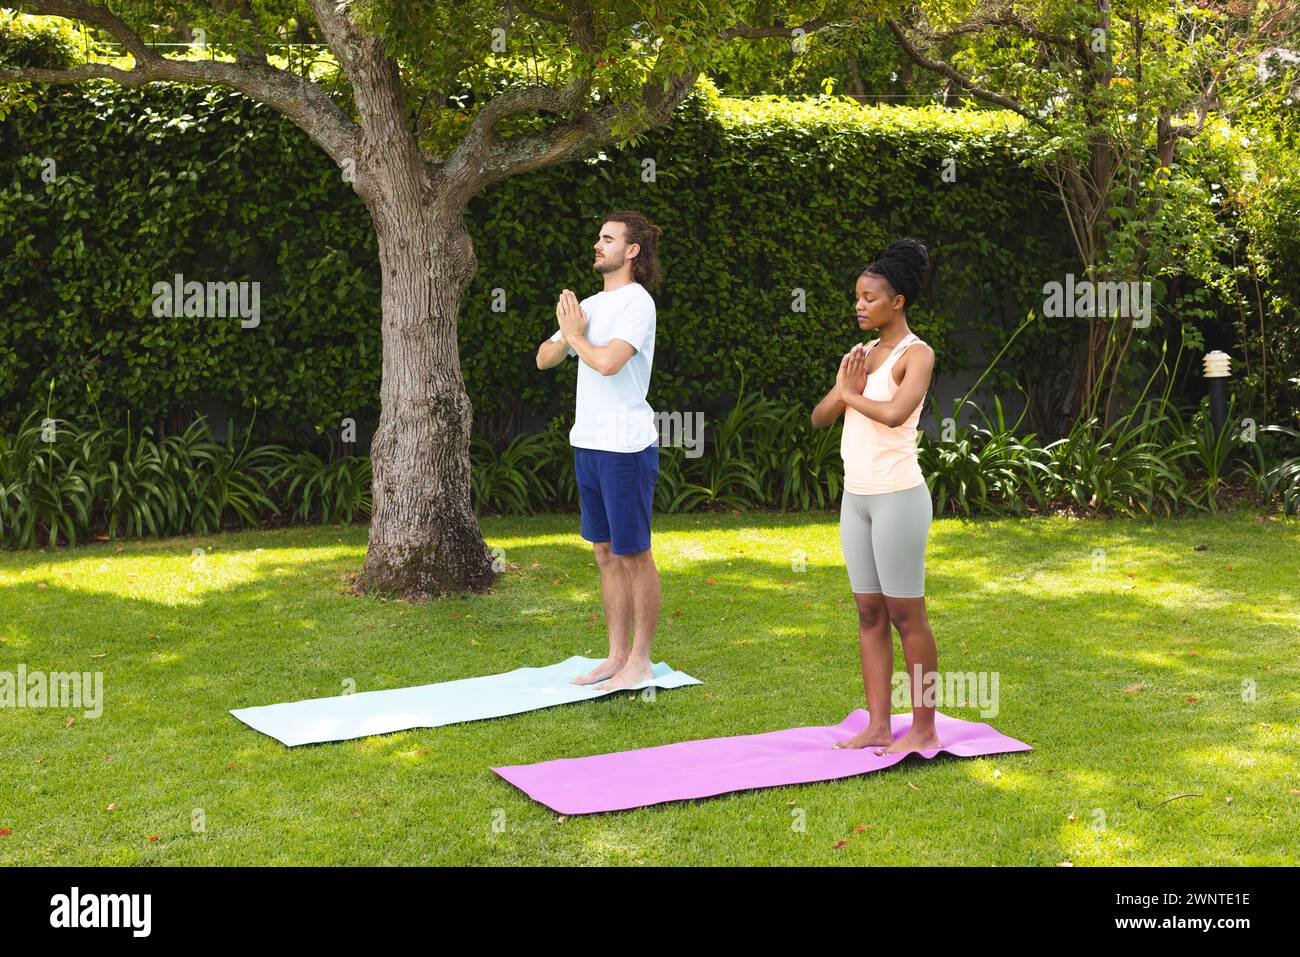 A diverse couple, a young Caucasian man and an African American woman, practice yoga outdoors Stock Photo